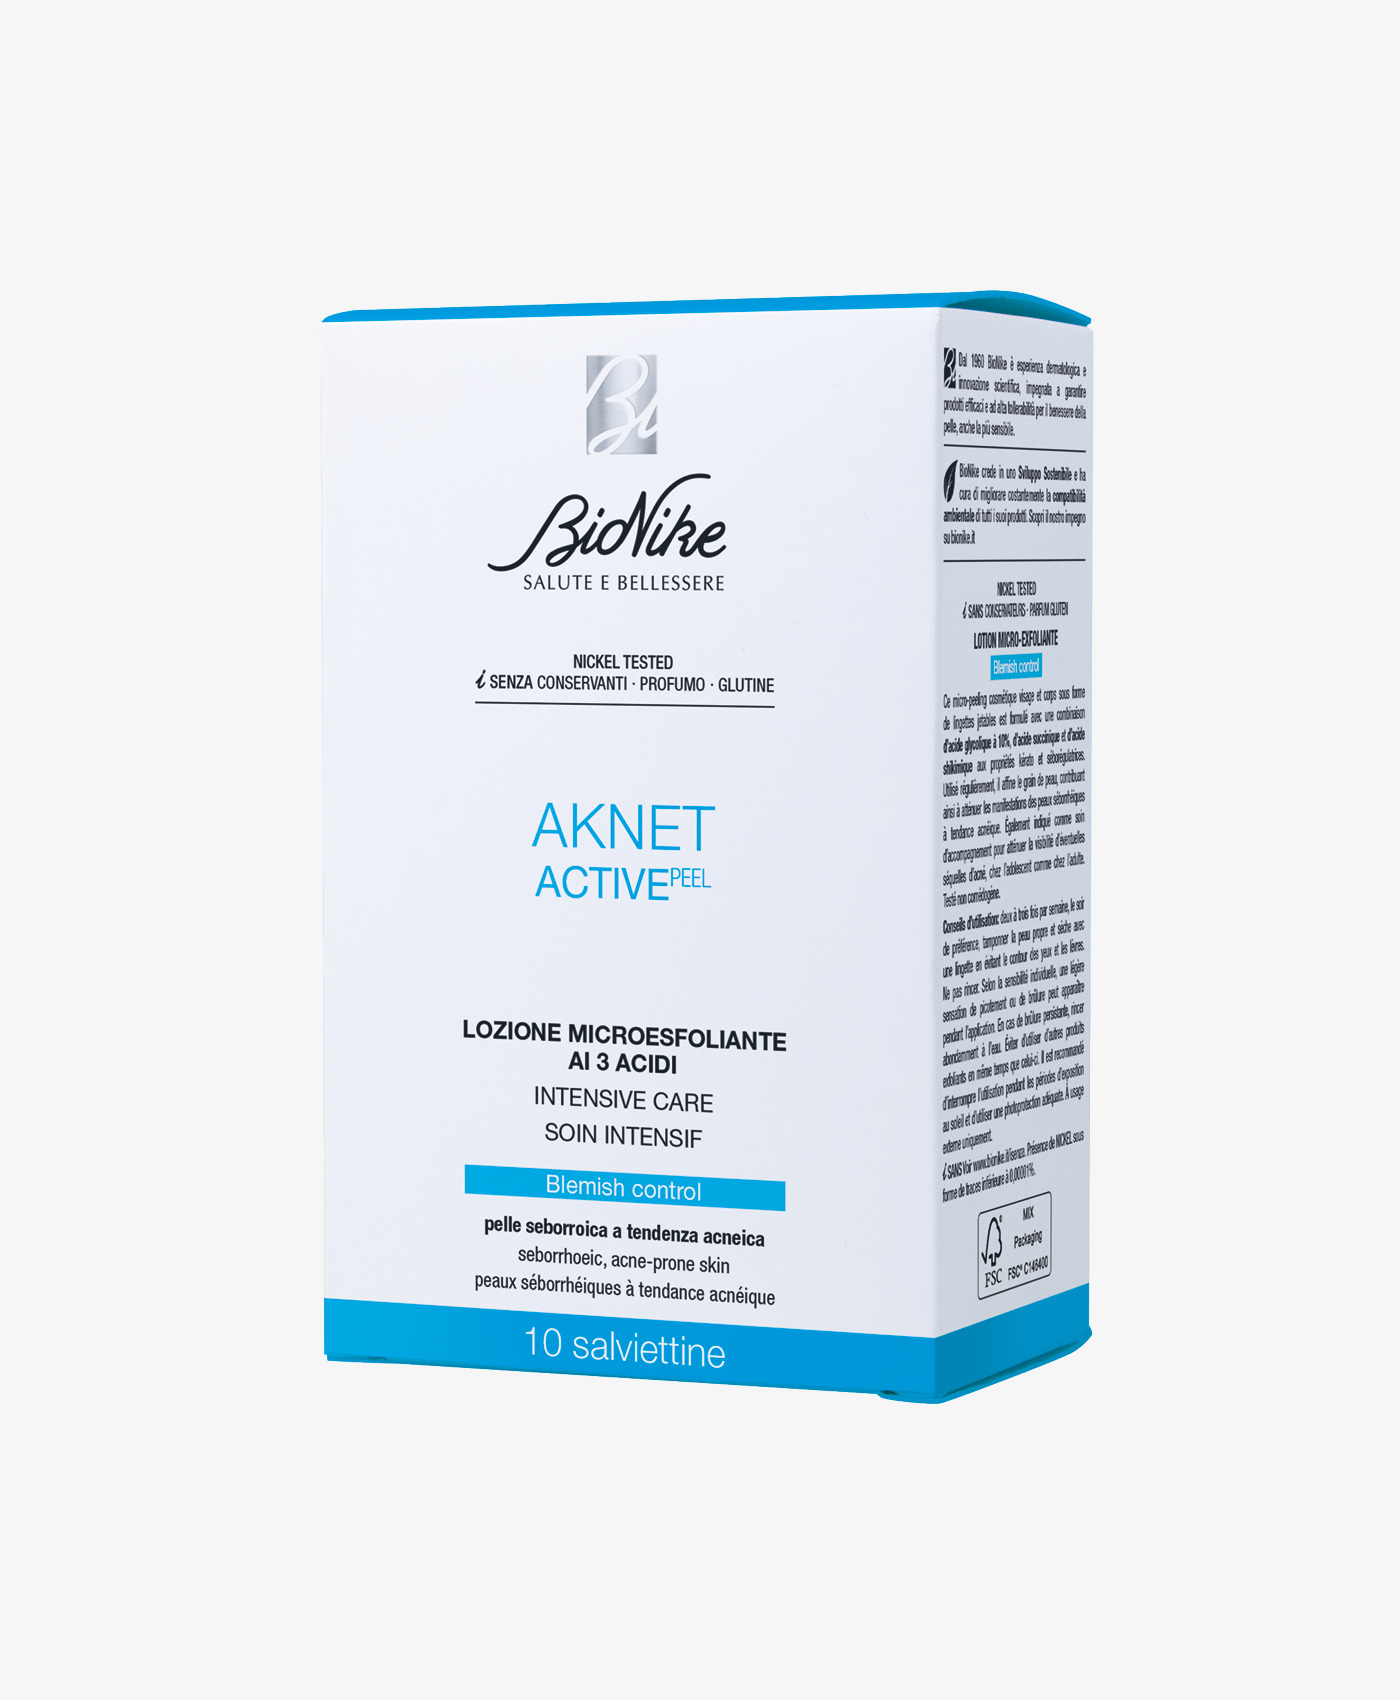 ACTIVEPEEL 3-acid microexfoliating lotion - BioNike - Sito Ufficiale